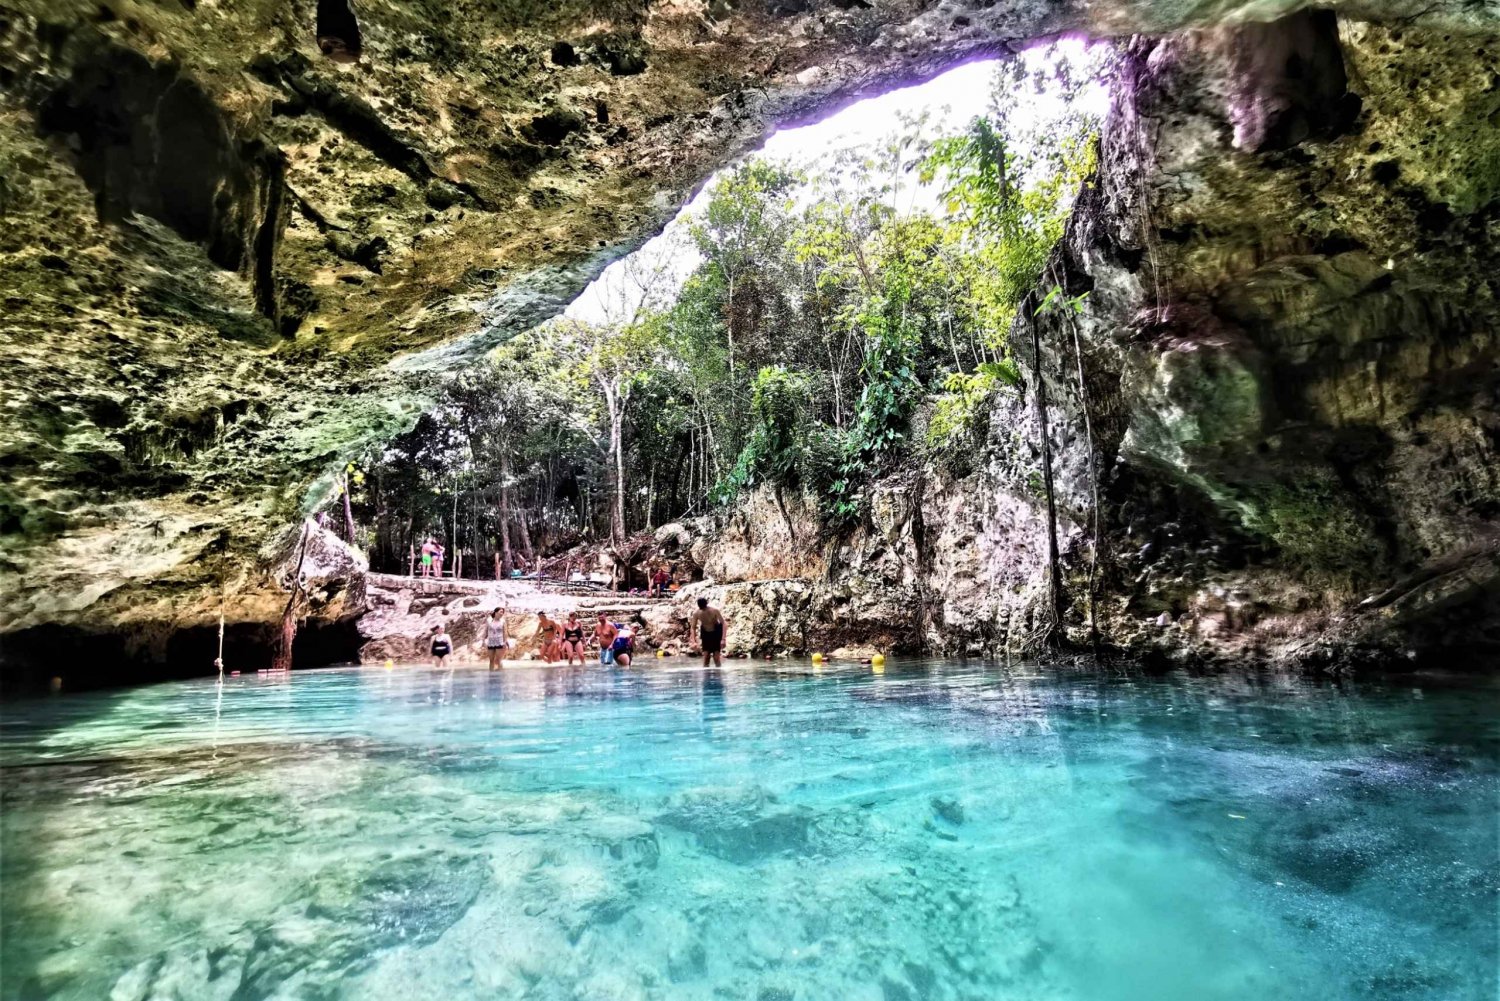 From Cancun or Puerto Morelos: Guided Day Trip to Tulum